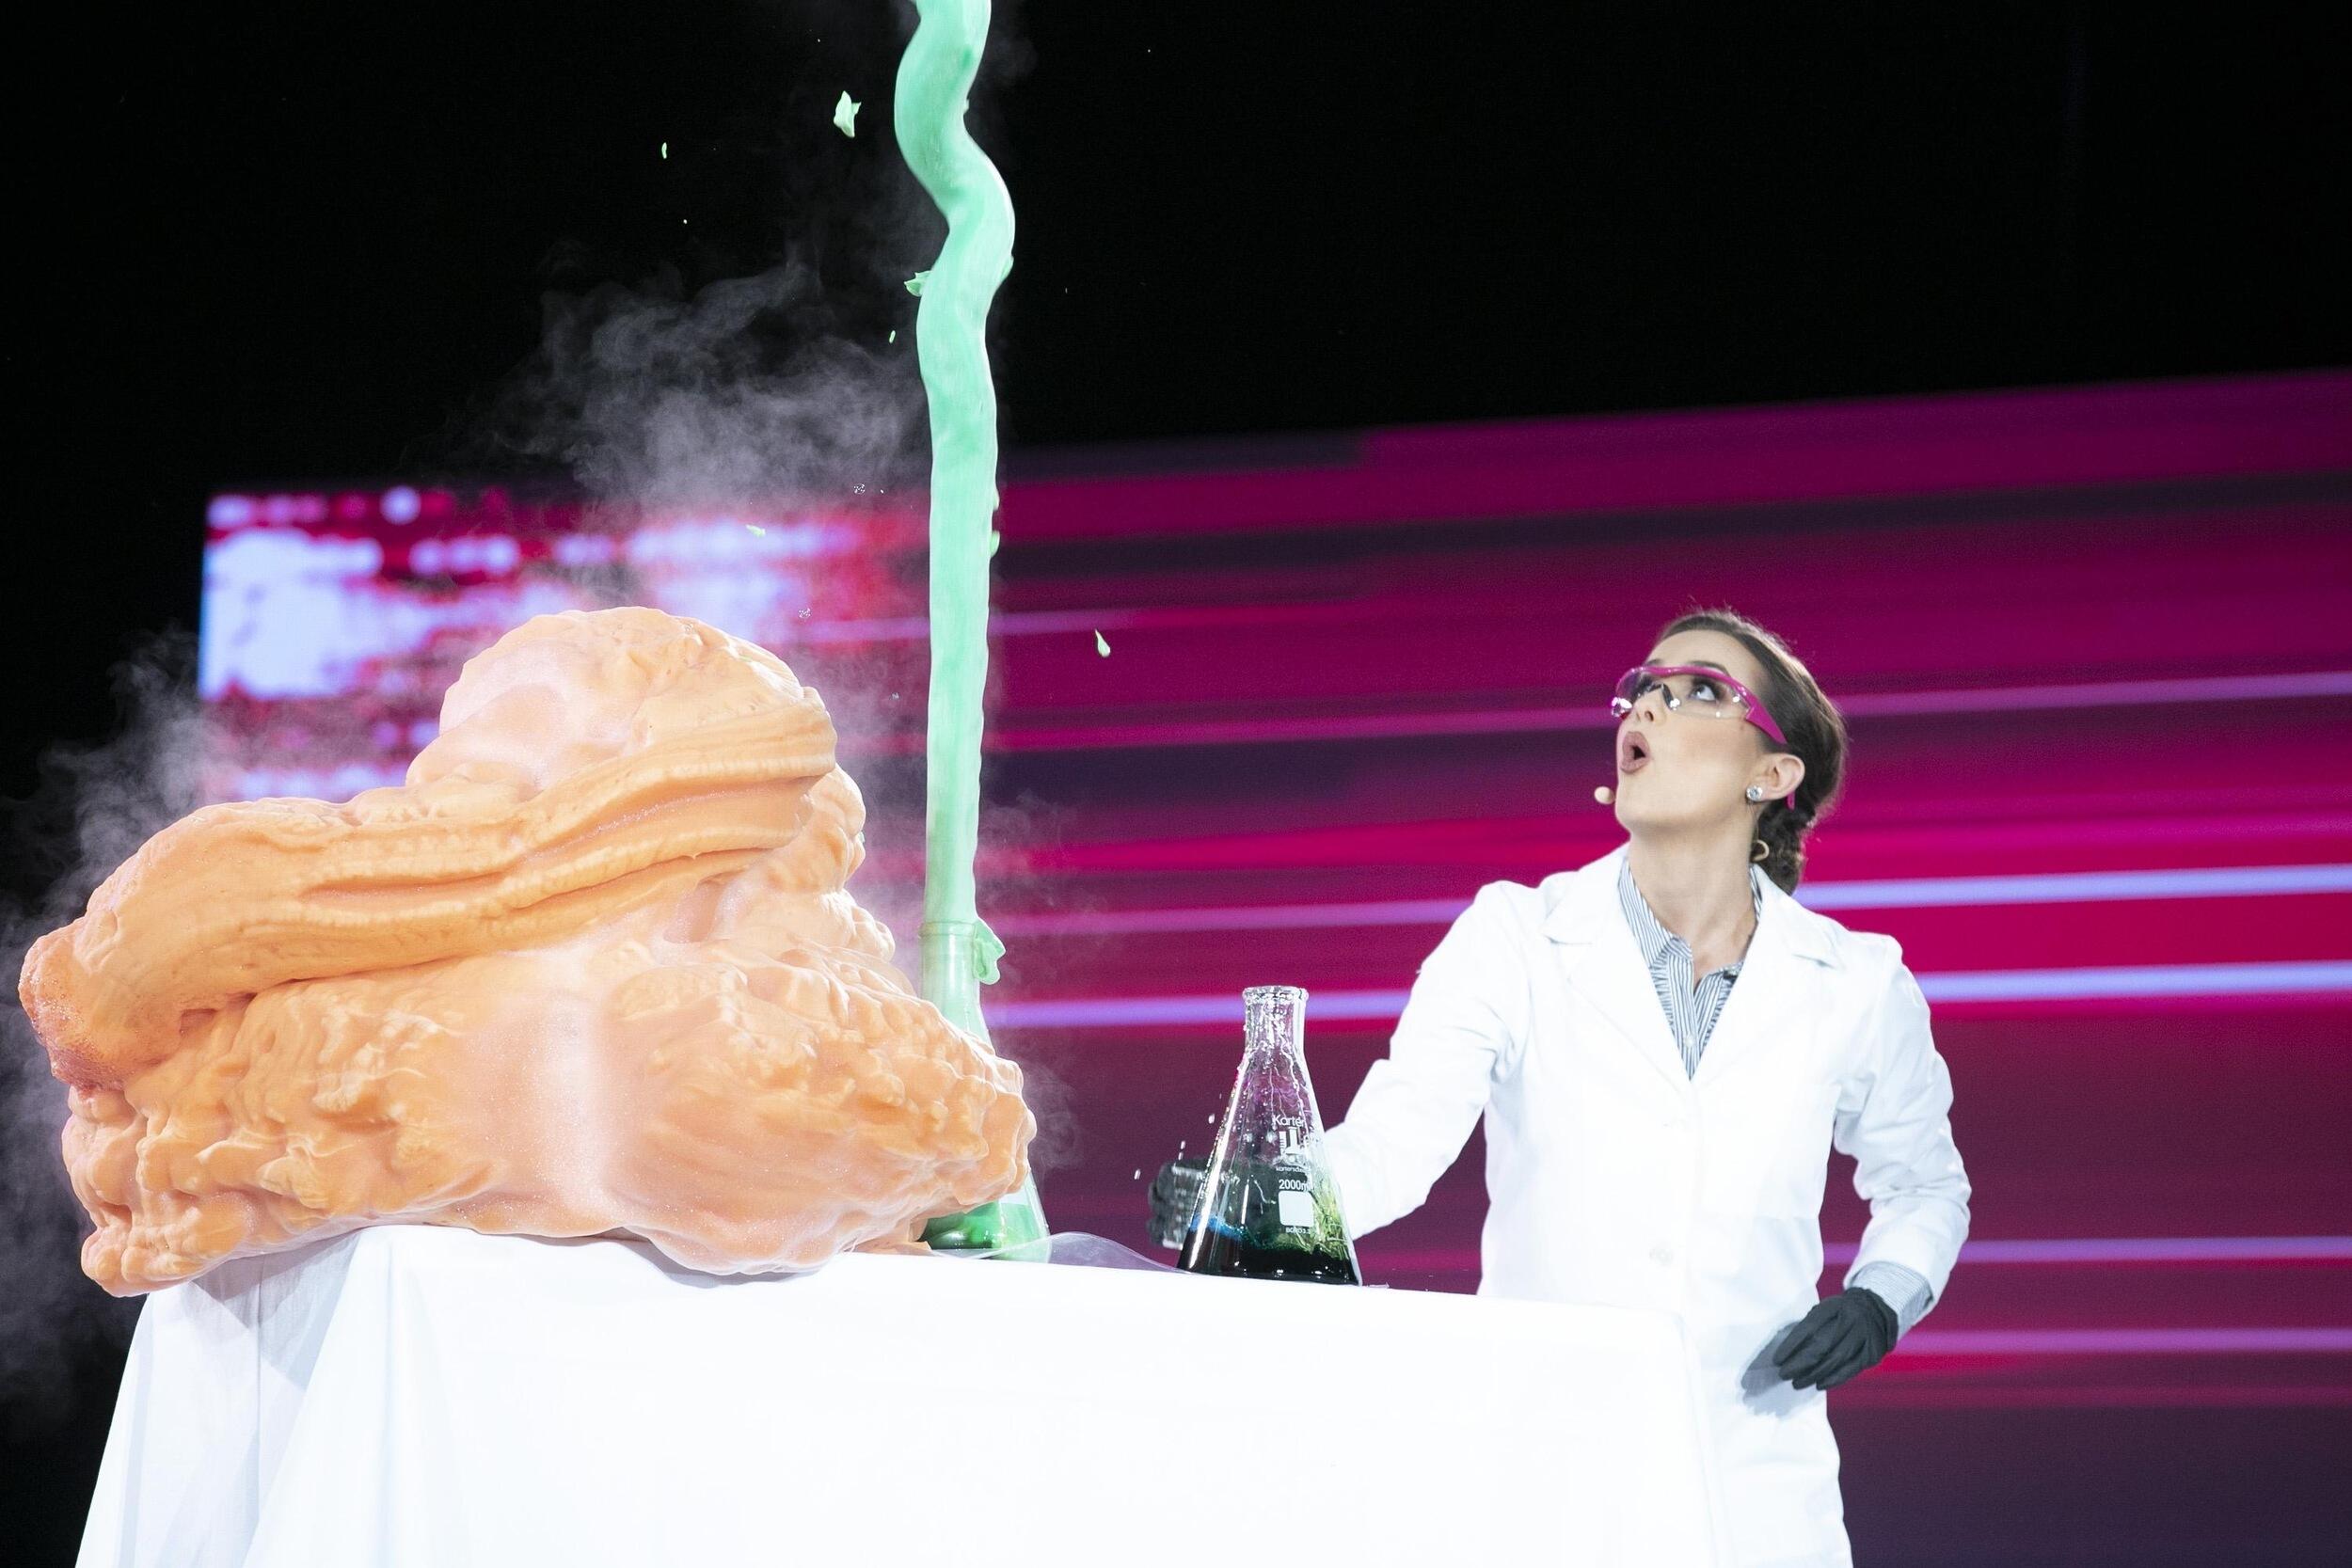 A photo of a woman wearing a labcoat looking up at a green susbstance shooting out of a beaker on a table. 